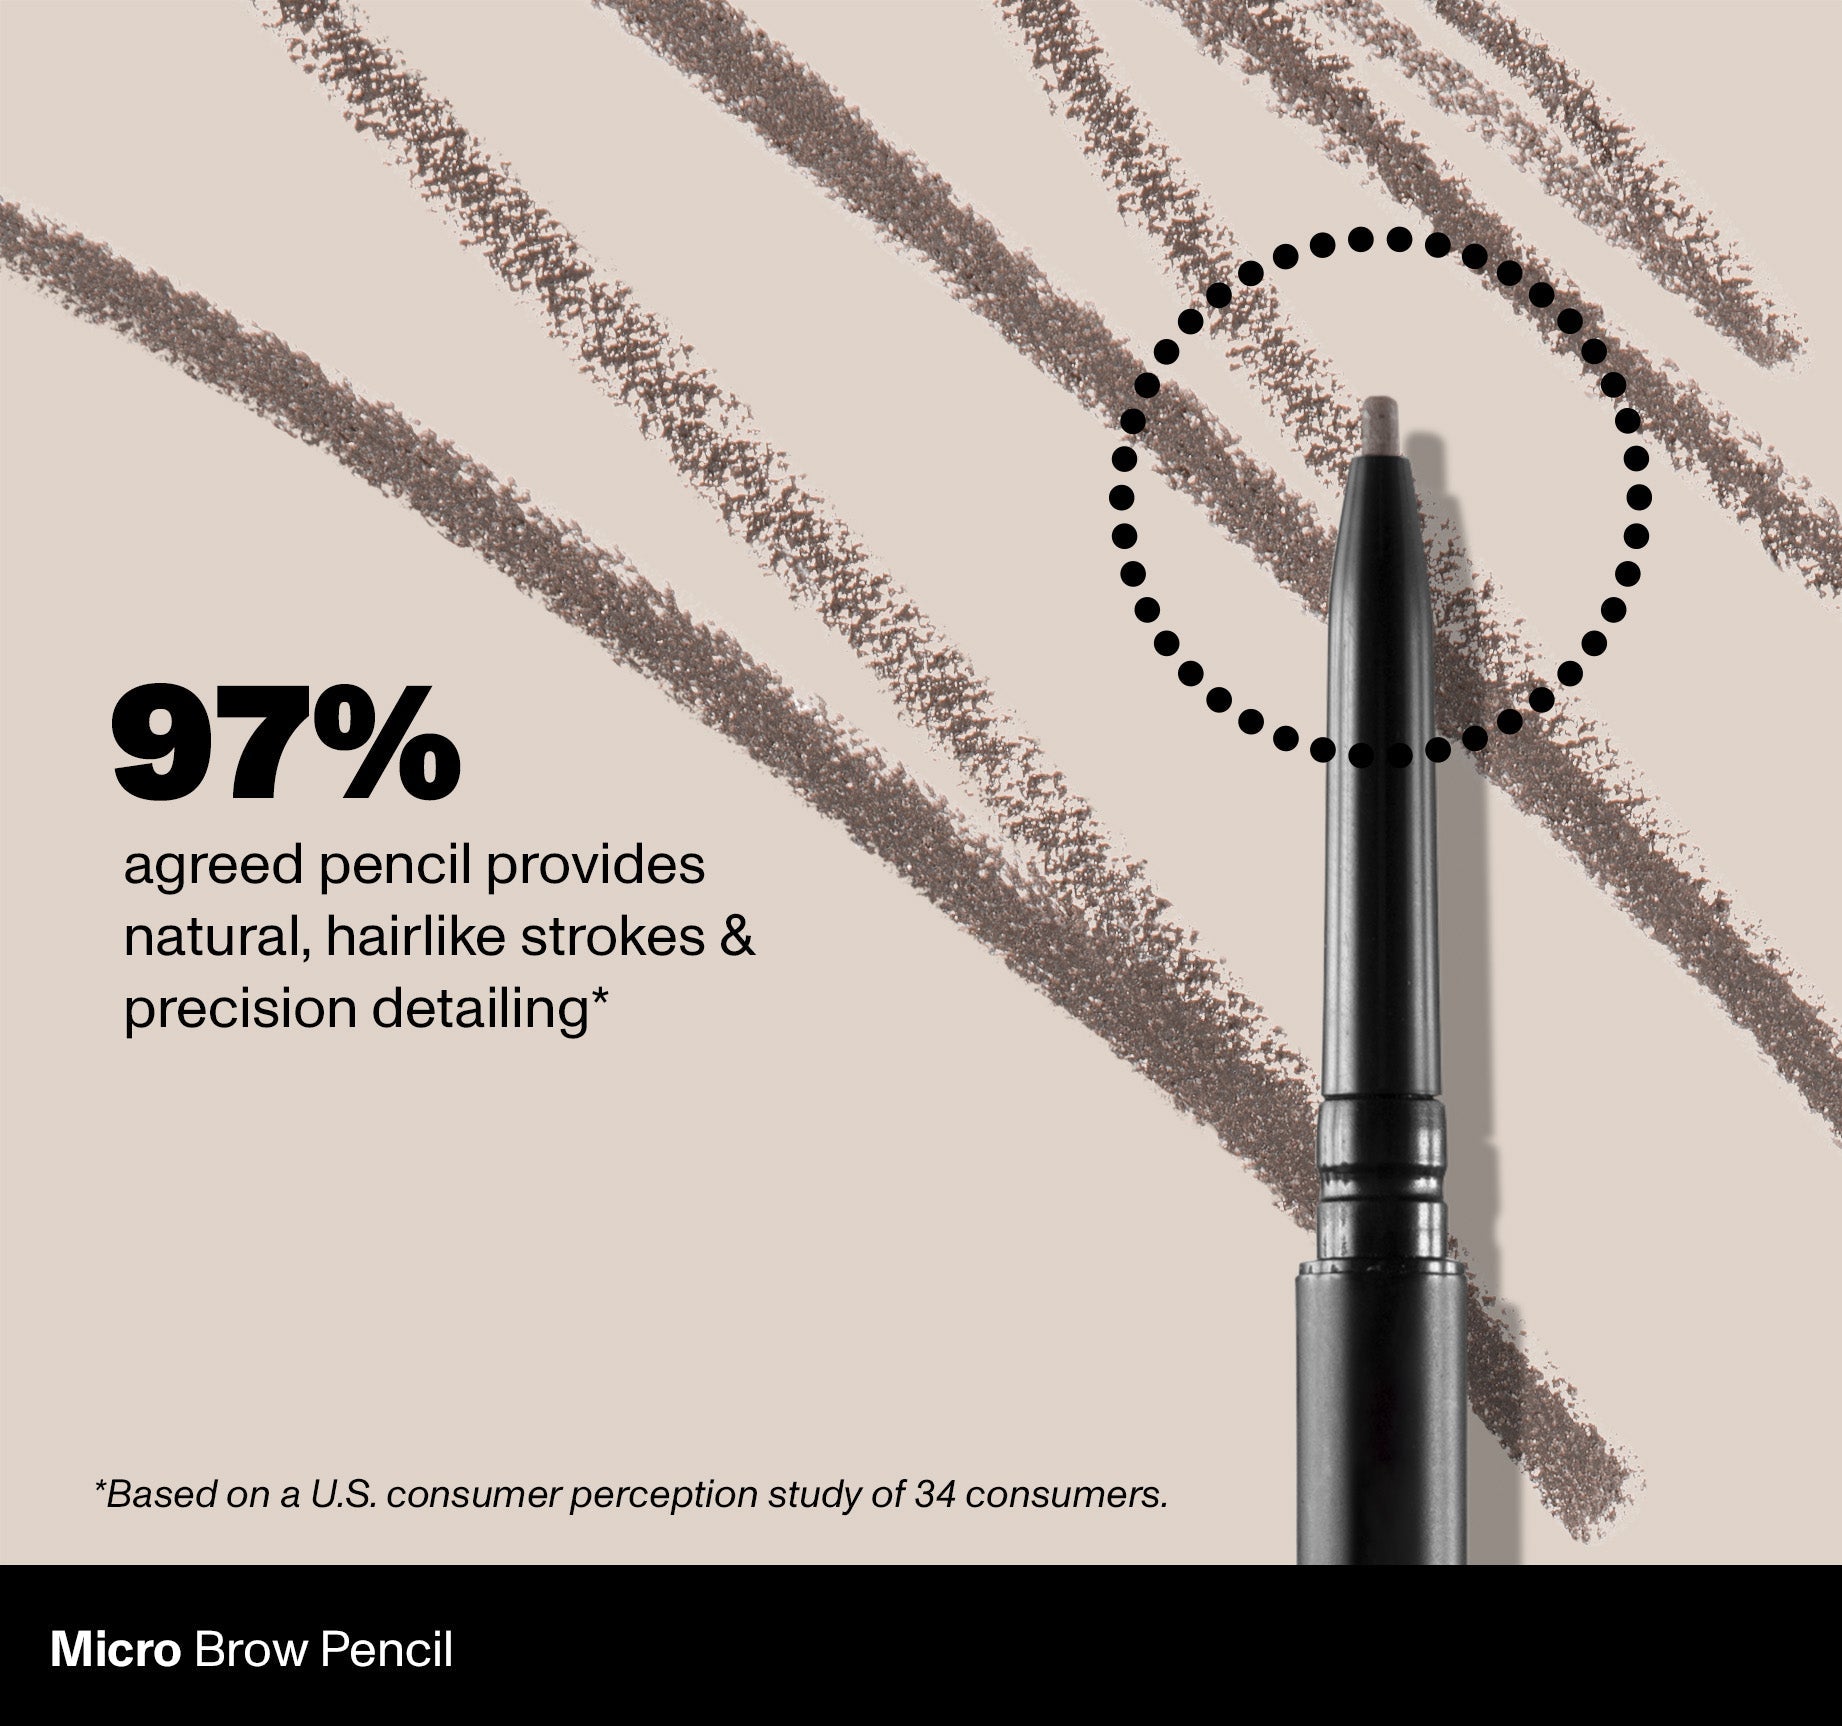 Micro Brow Pencil | 97% agreed pencil provides natural, hairlike strokes & precision detailing* | *Based on a U.S. consumer perception study of 34 consumers.